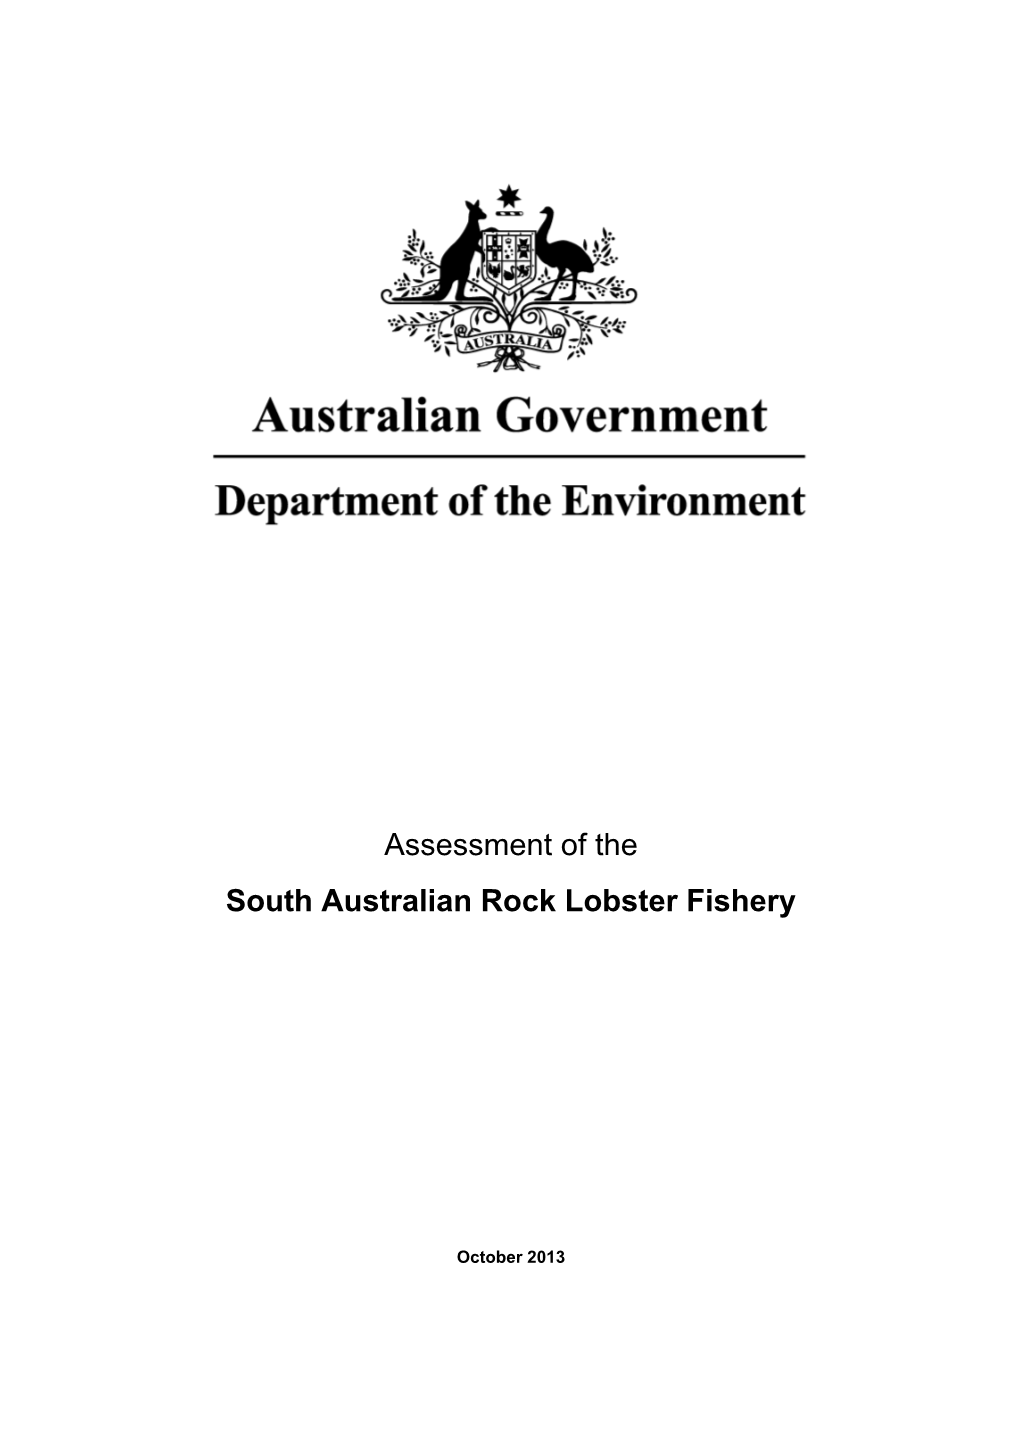 Assessment of the South Australian Rock Lobster Fishery